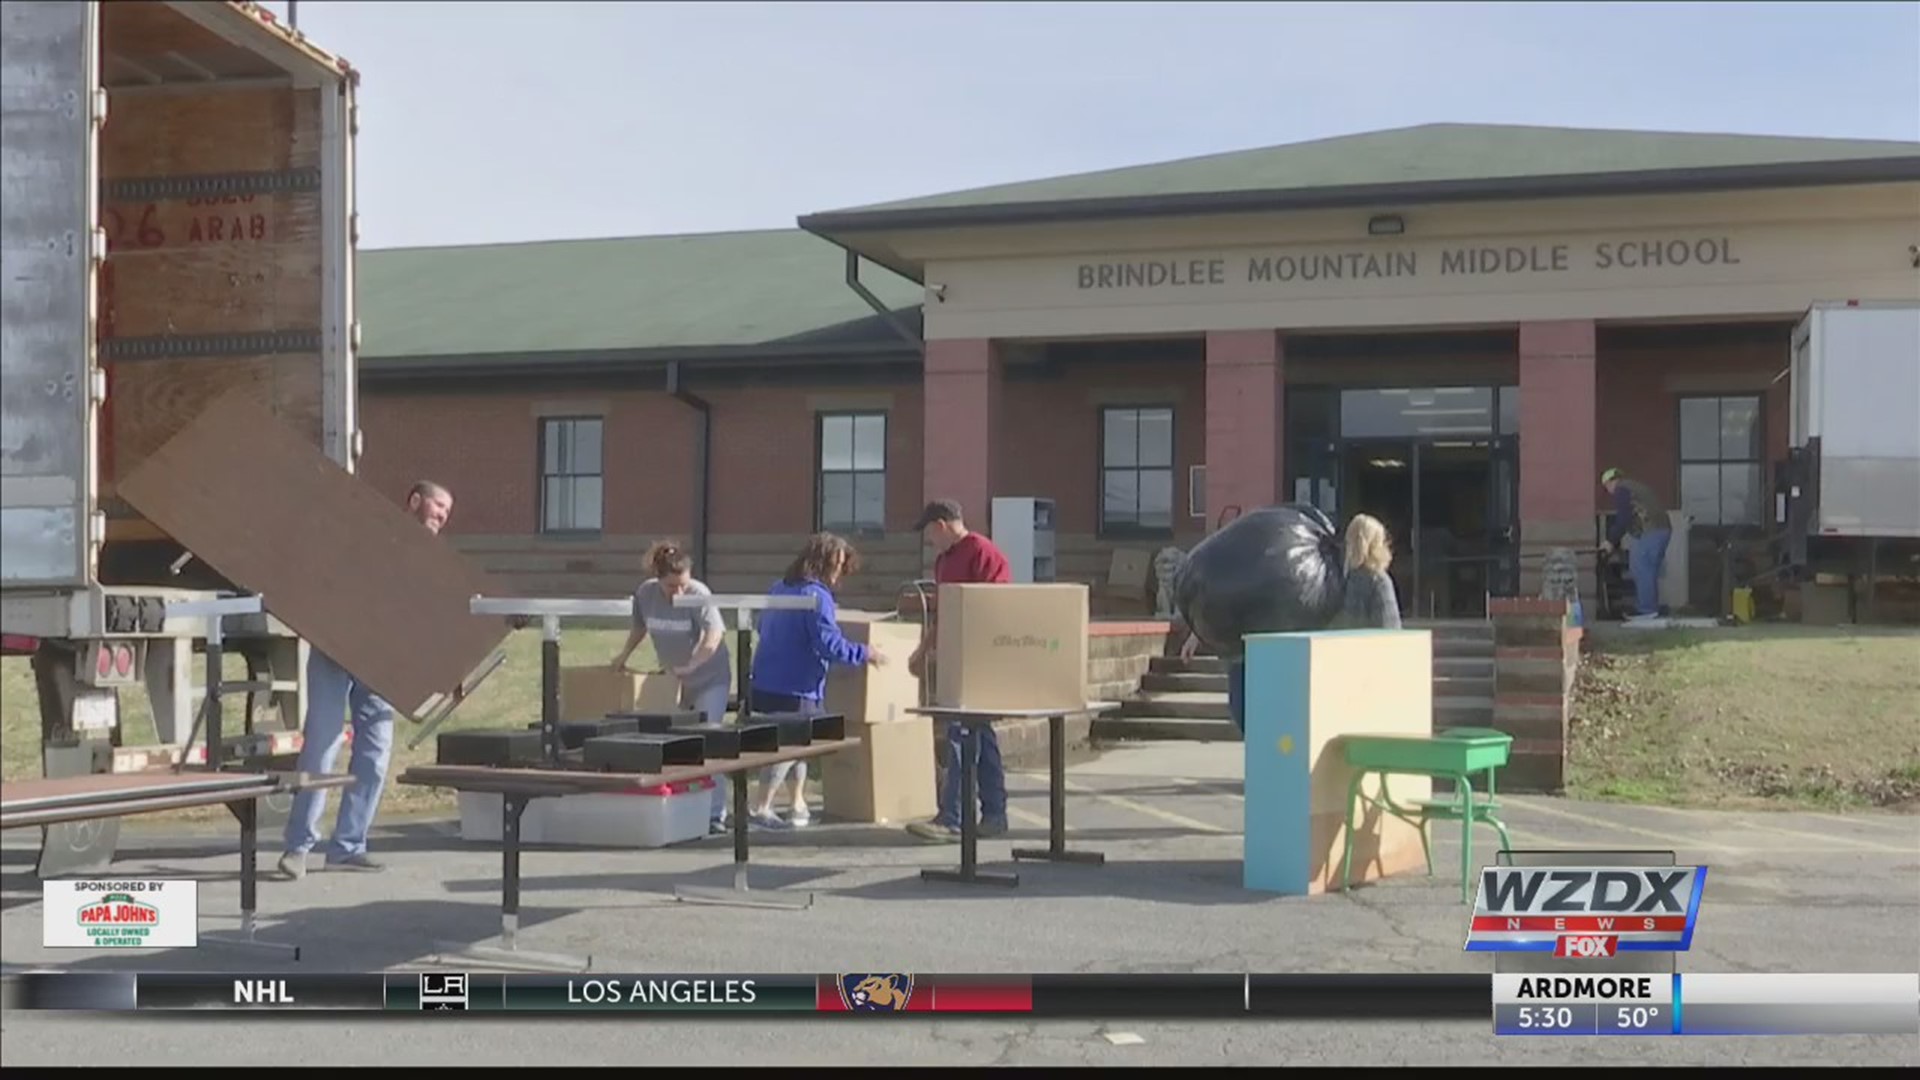 Recovery efforts following Saturday's tornado continued at Brindlee Mountain Primary School Thursday morning, while crews and volunteers moved supplies and furniture into Brindlee Mountain High School, where the primary school students will resume classes on January 27th.